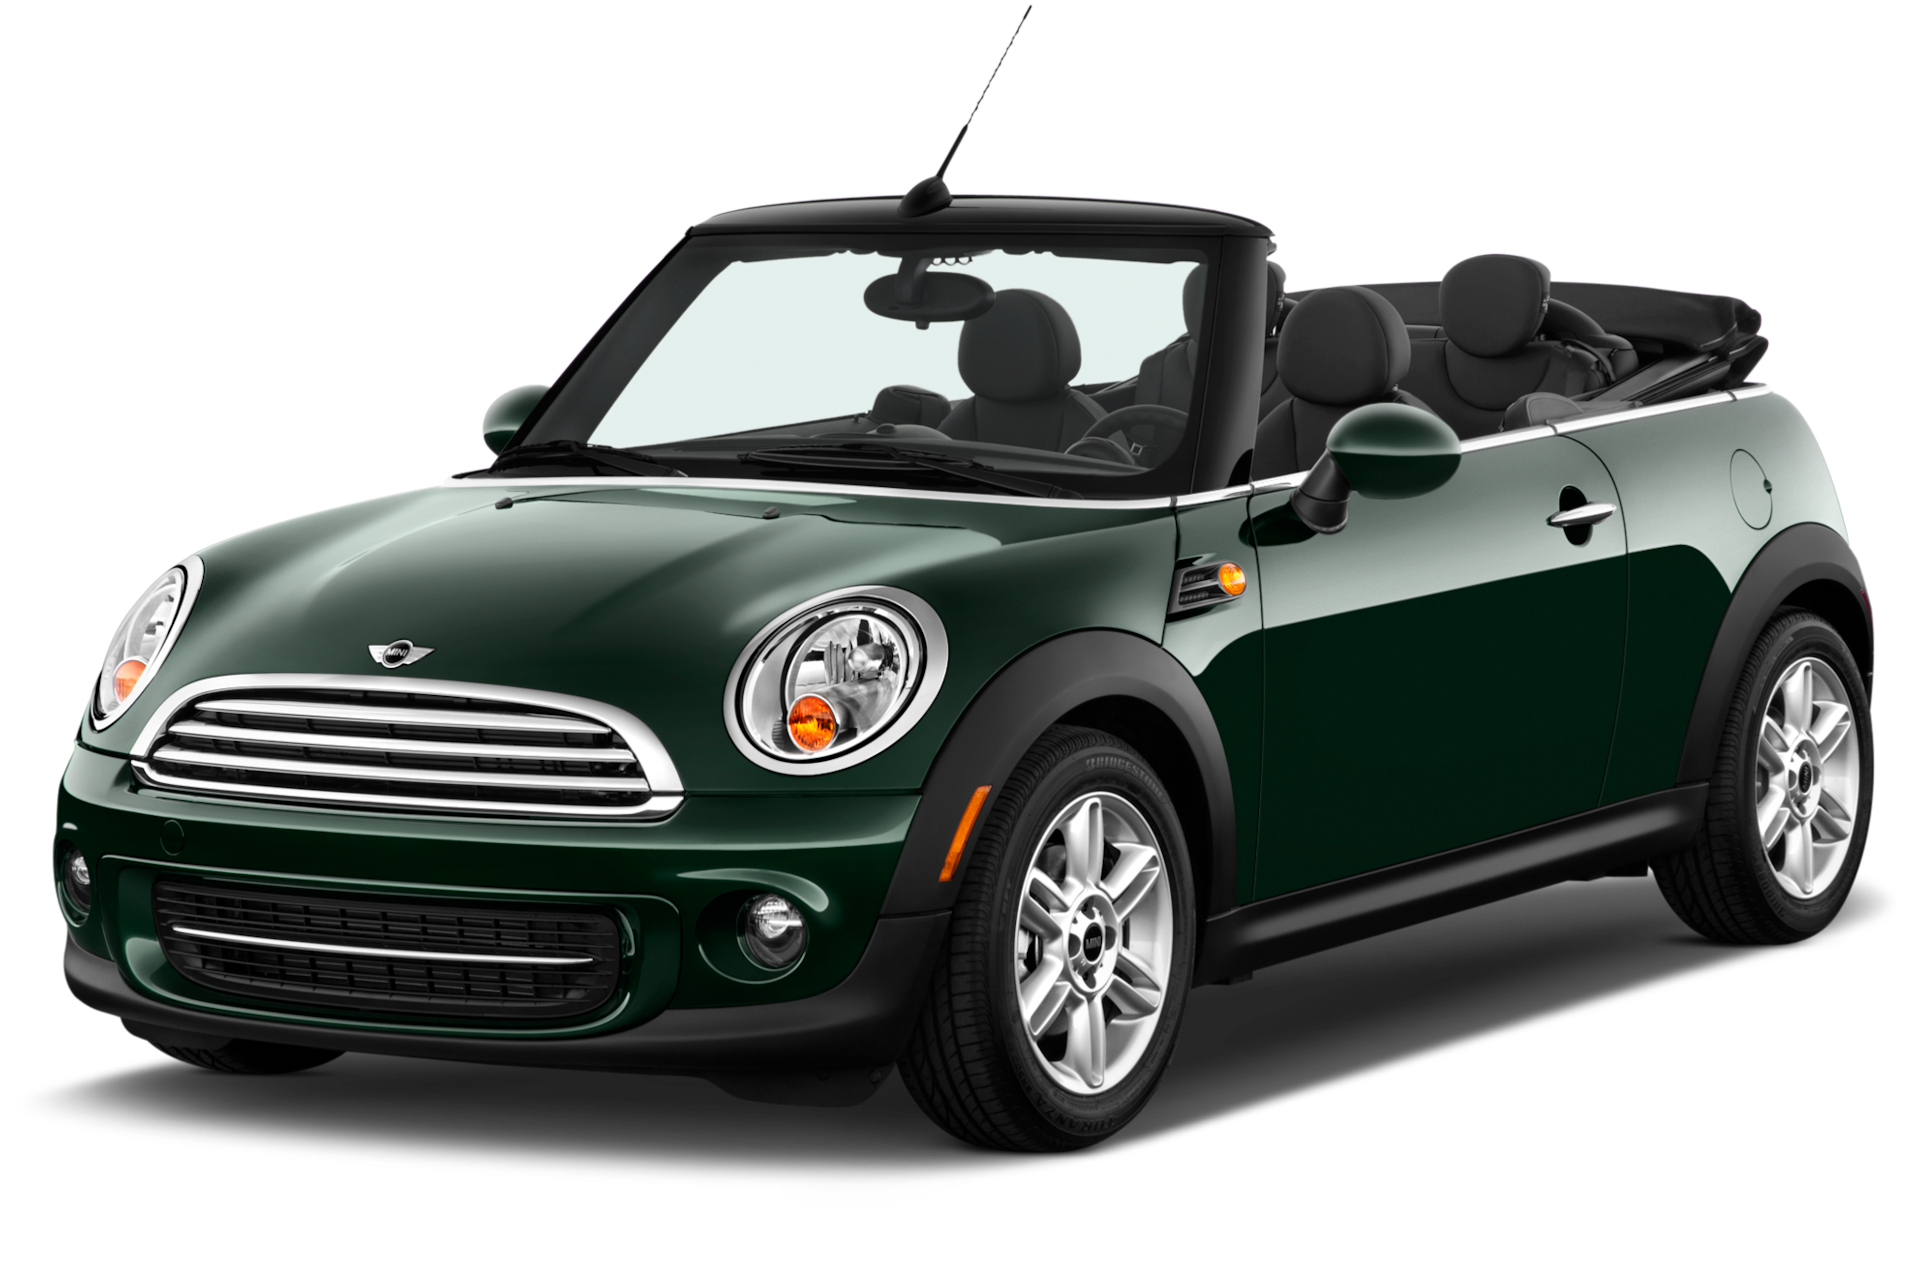 2014 MINI Cooper Prices, Reviews, and Photos - MotorTrend